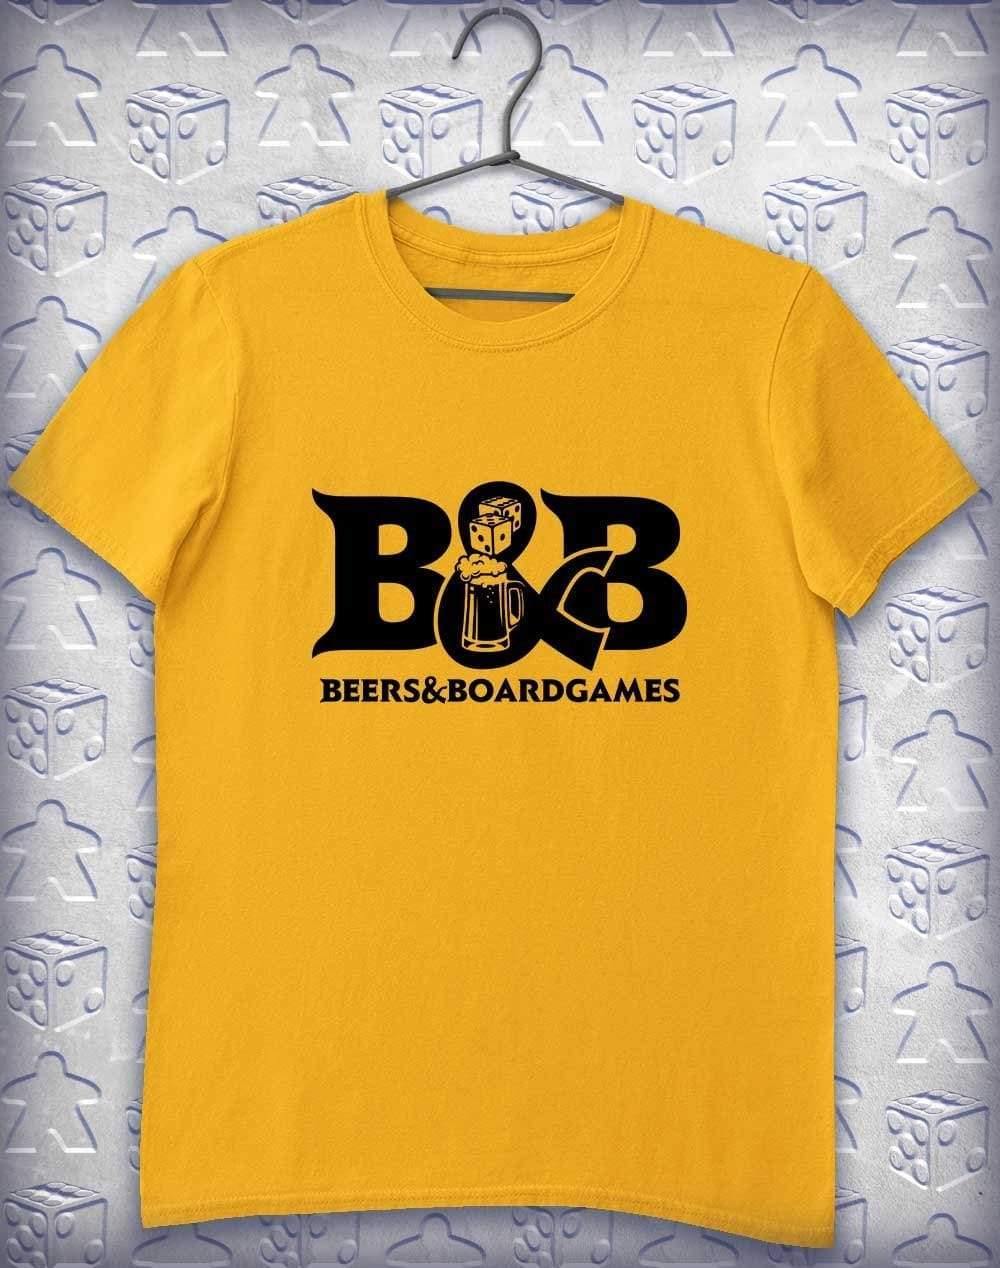 B&B Beers and Boardgames T-Shirt S / Gold  - Off World Tees